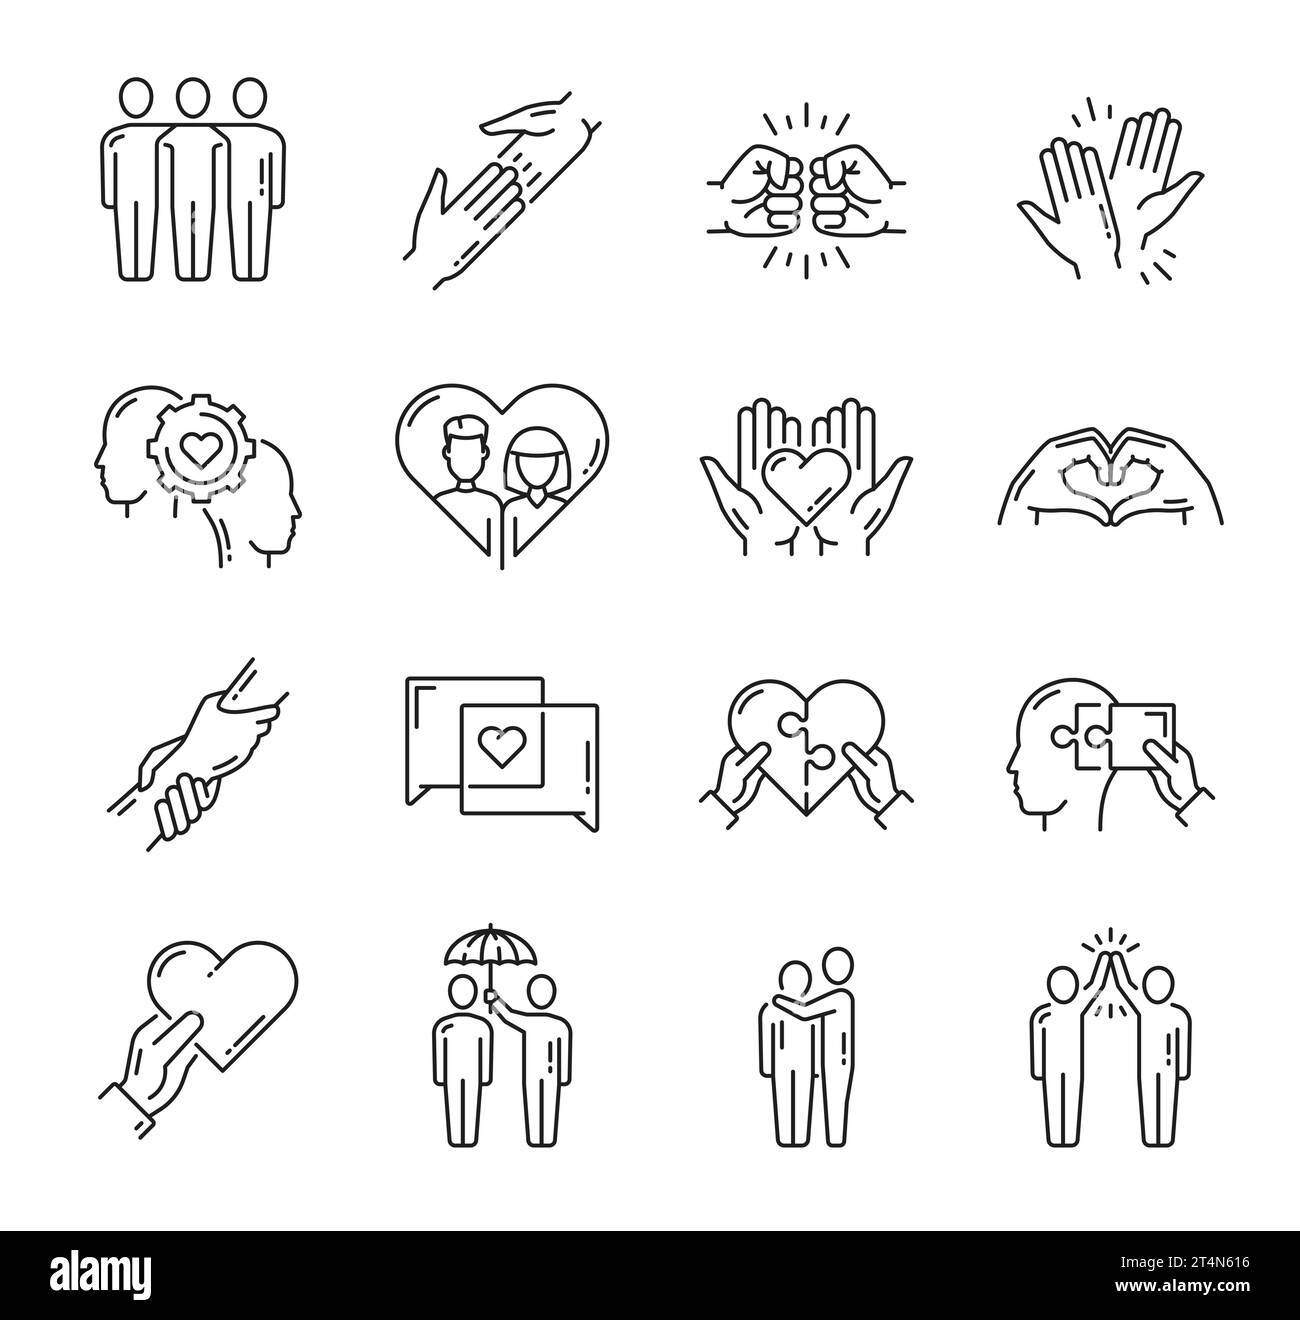 Help, support, friendship, love and community icons with vector line hands, hearts, heads and people figures. Social, friends and family relationship, help, trust and respect isolated symbols Stock Vector